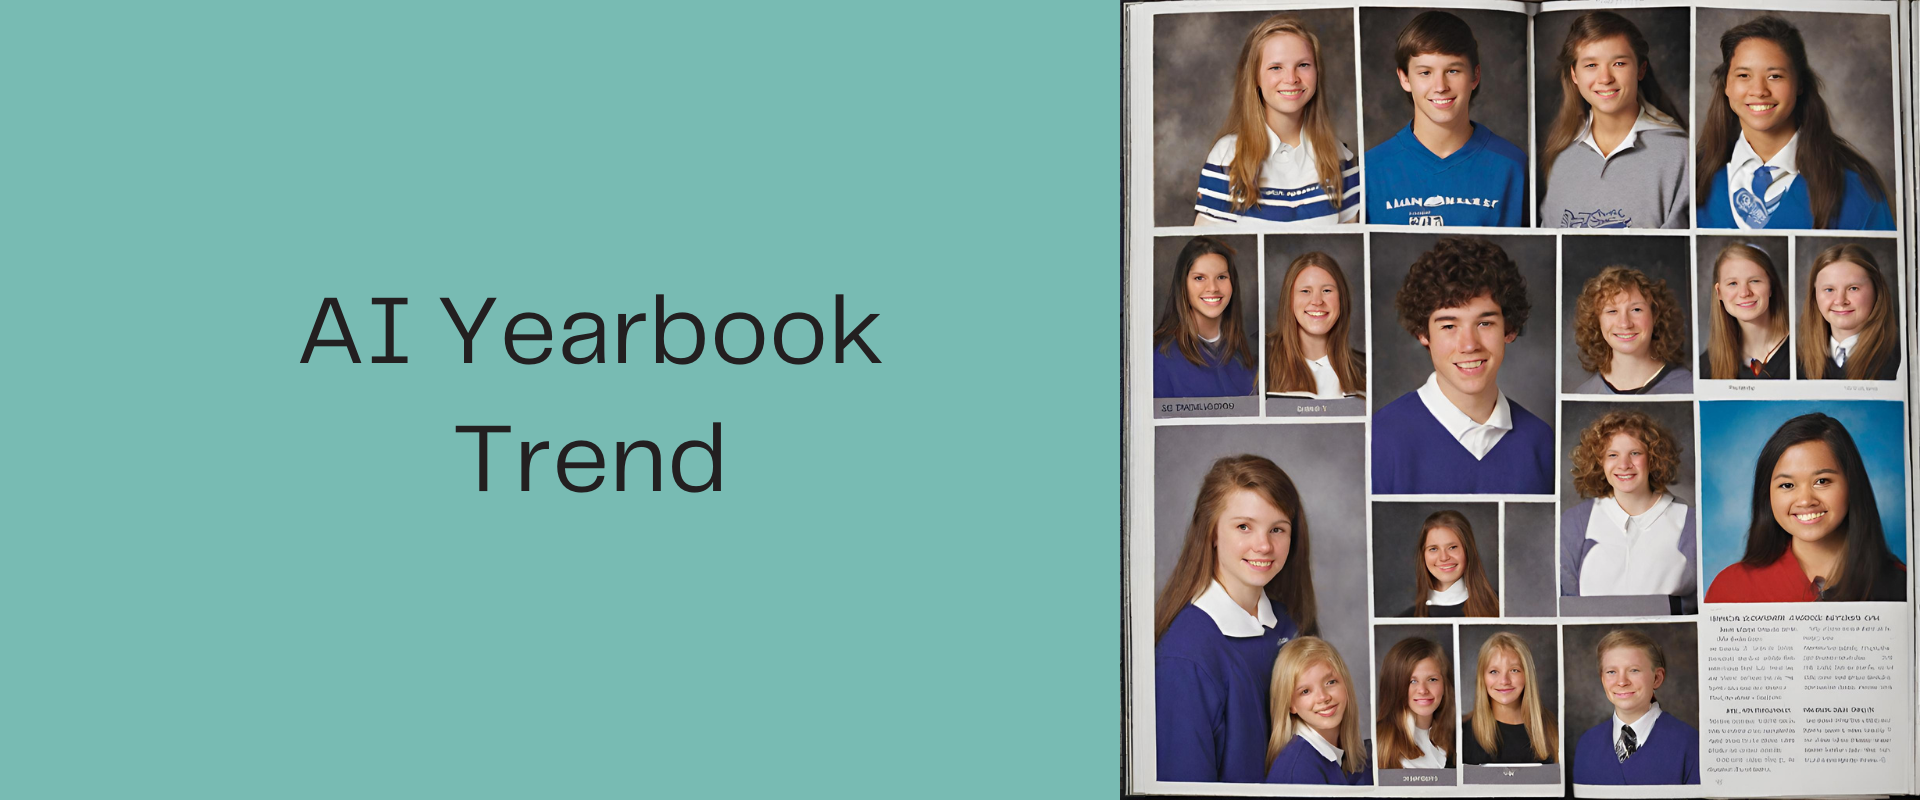 AI Yearbook Trend